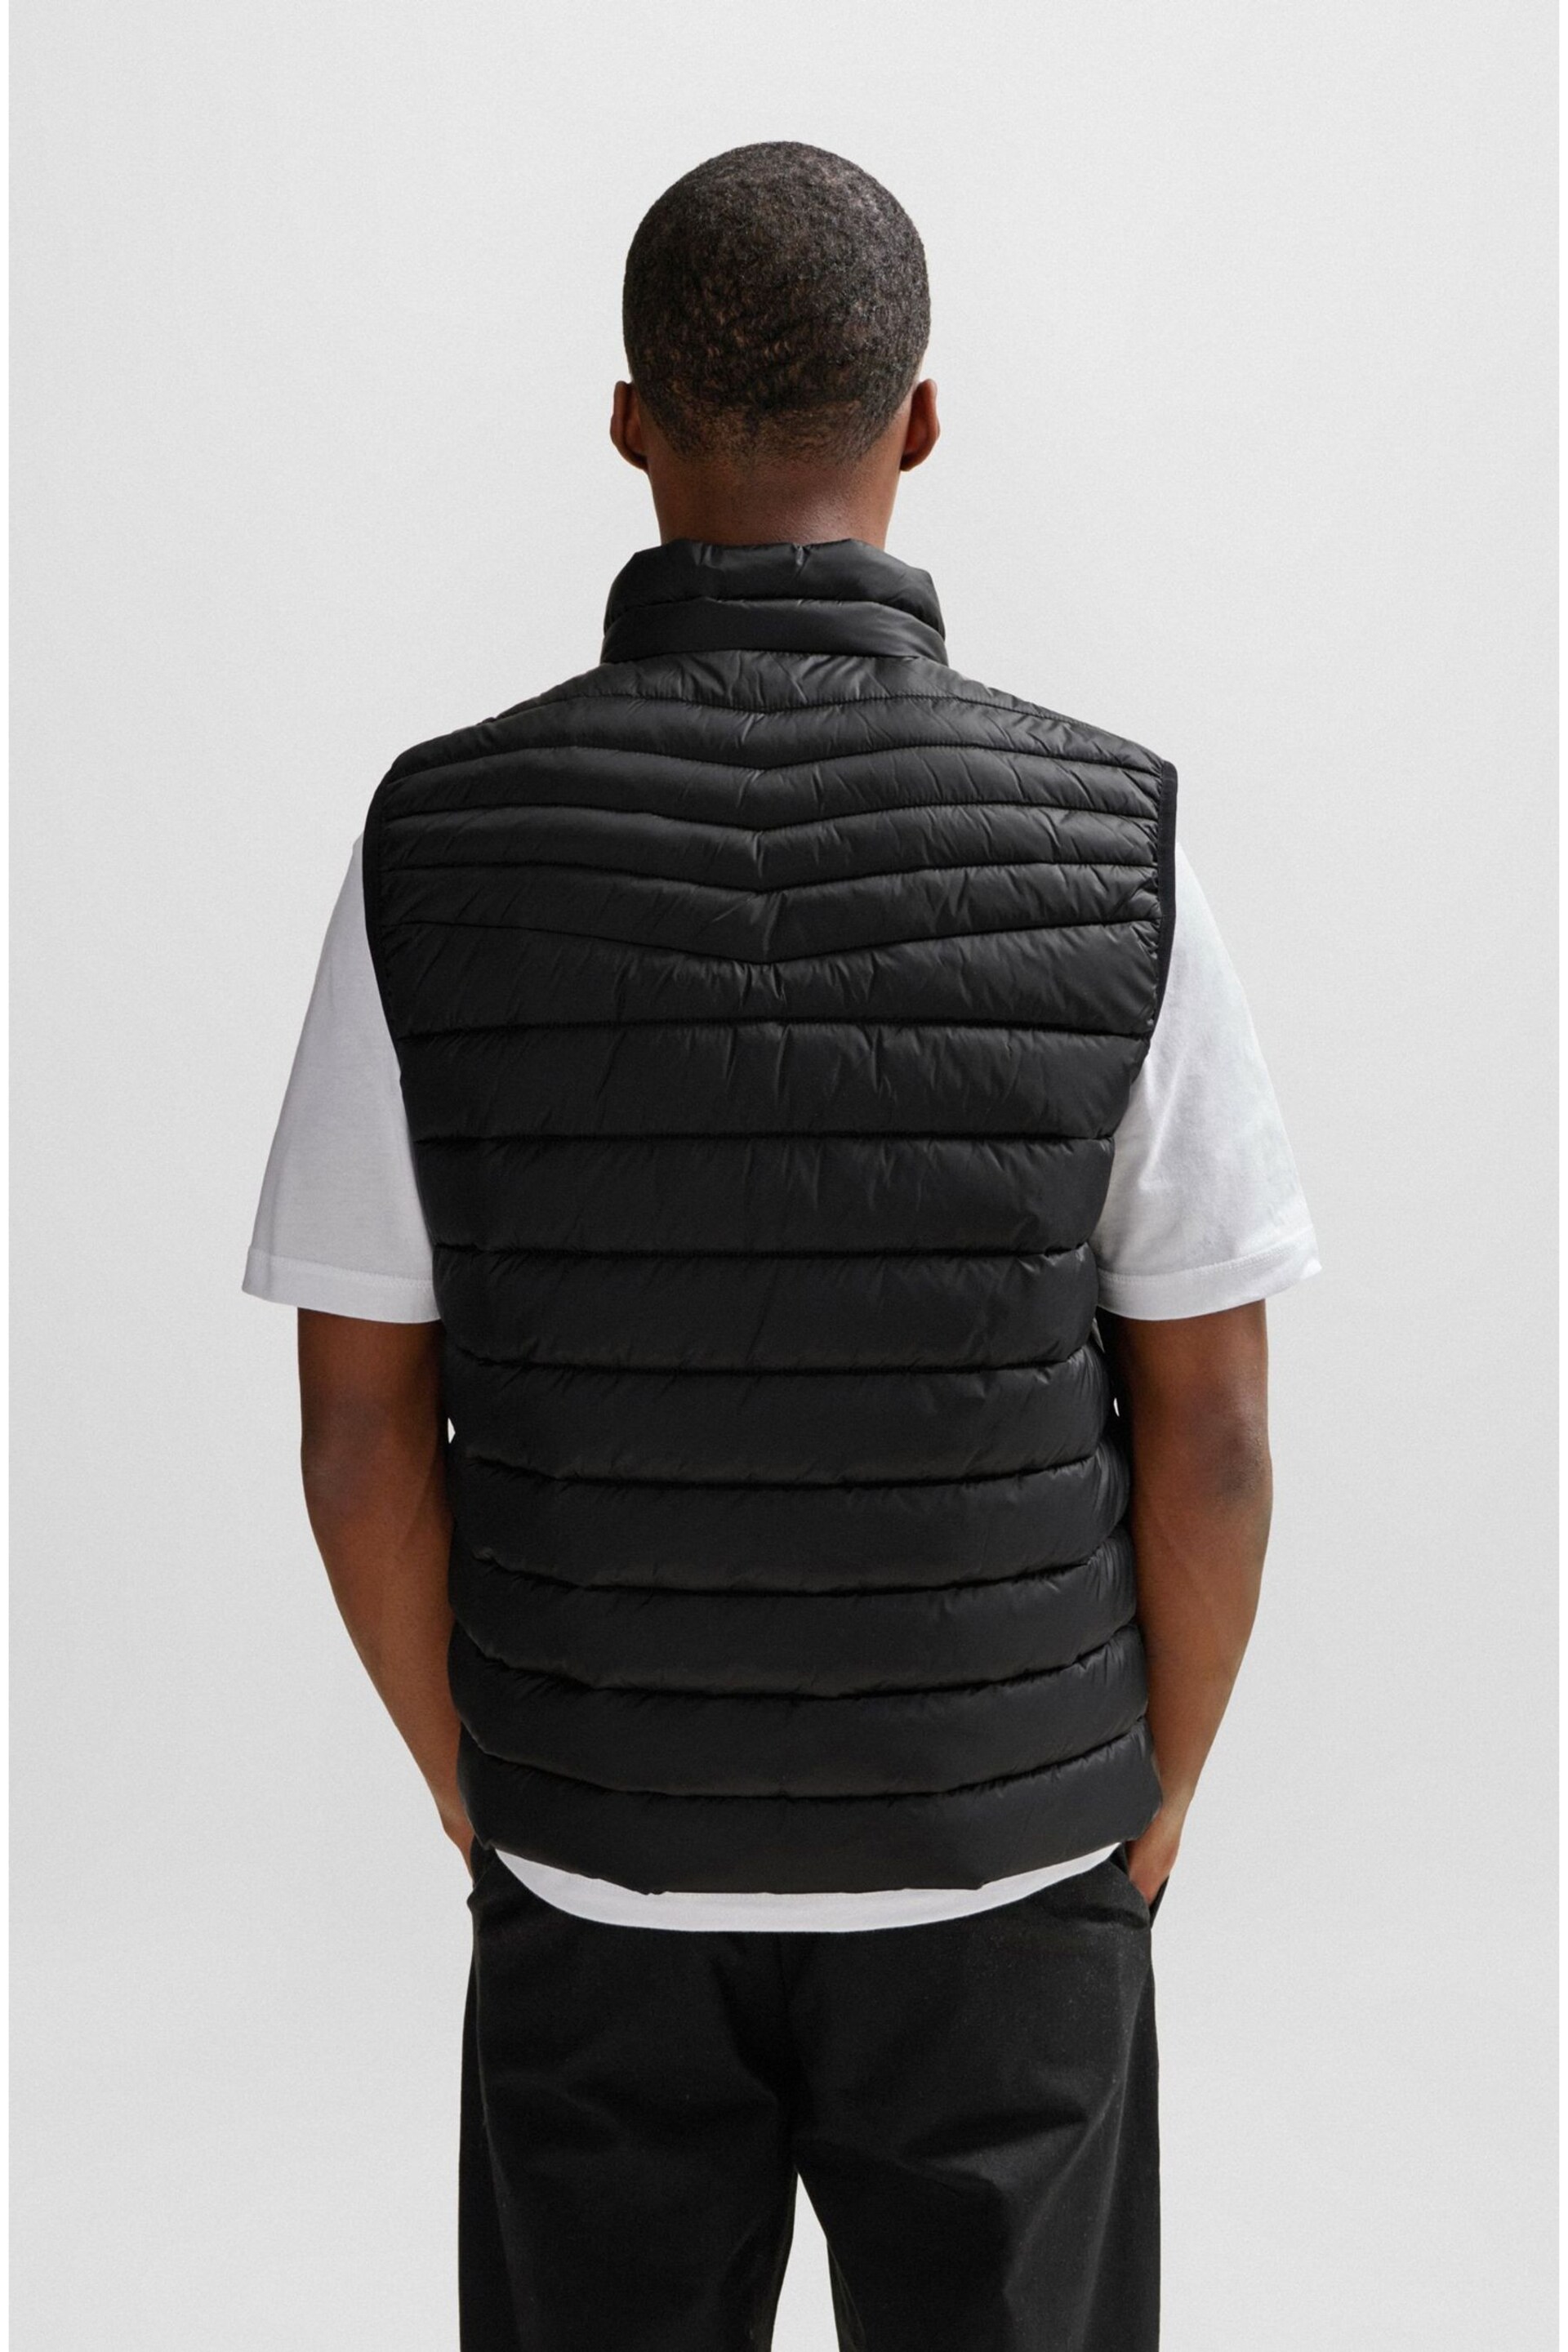 BOSS Black Lightweight Padded Gilet With Water-Repellent Finish - Image 2 of 6